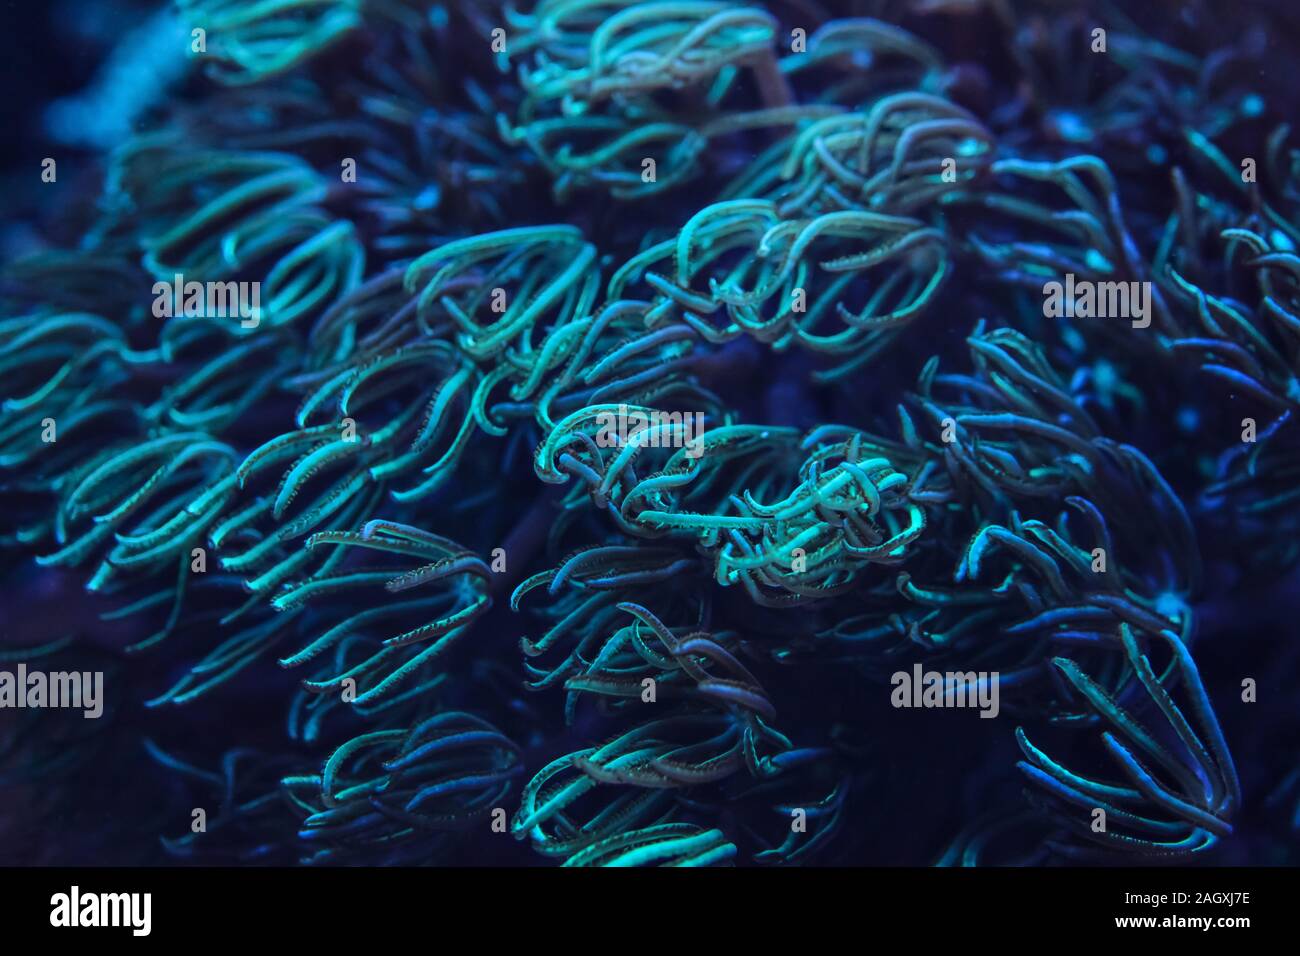 Underwater photo, coral under UV light, tentacles emitting blue and cyan. Abstract marine life background. Stock Photo